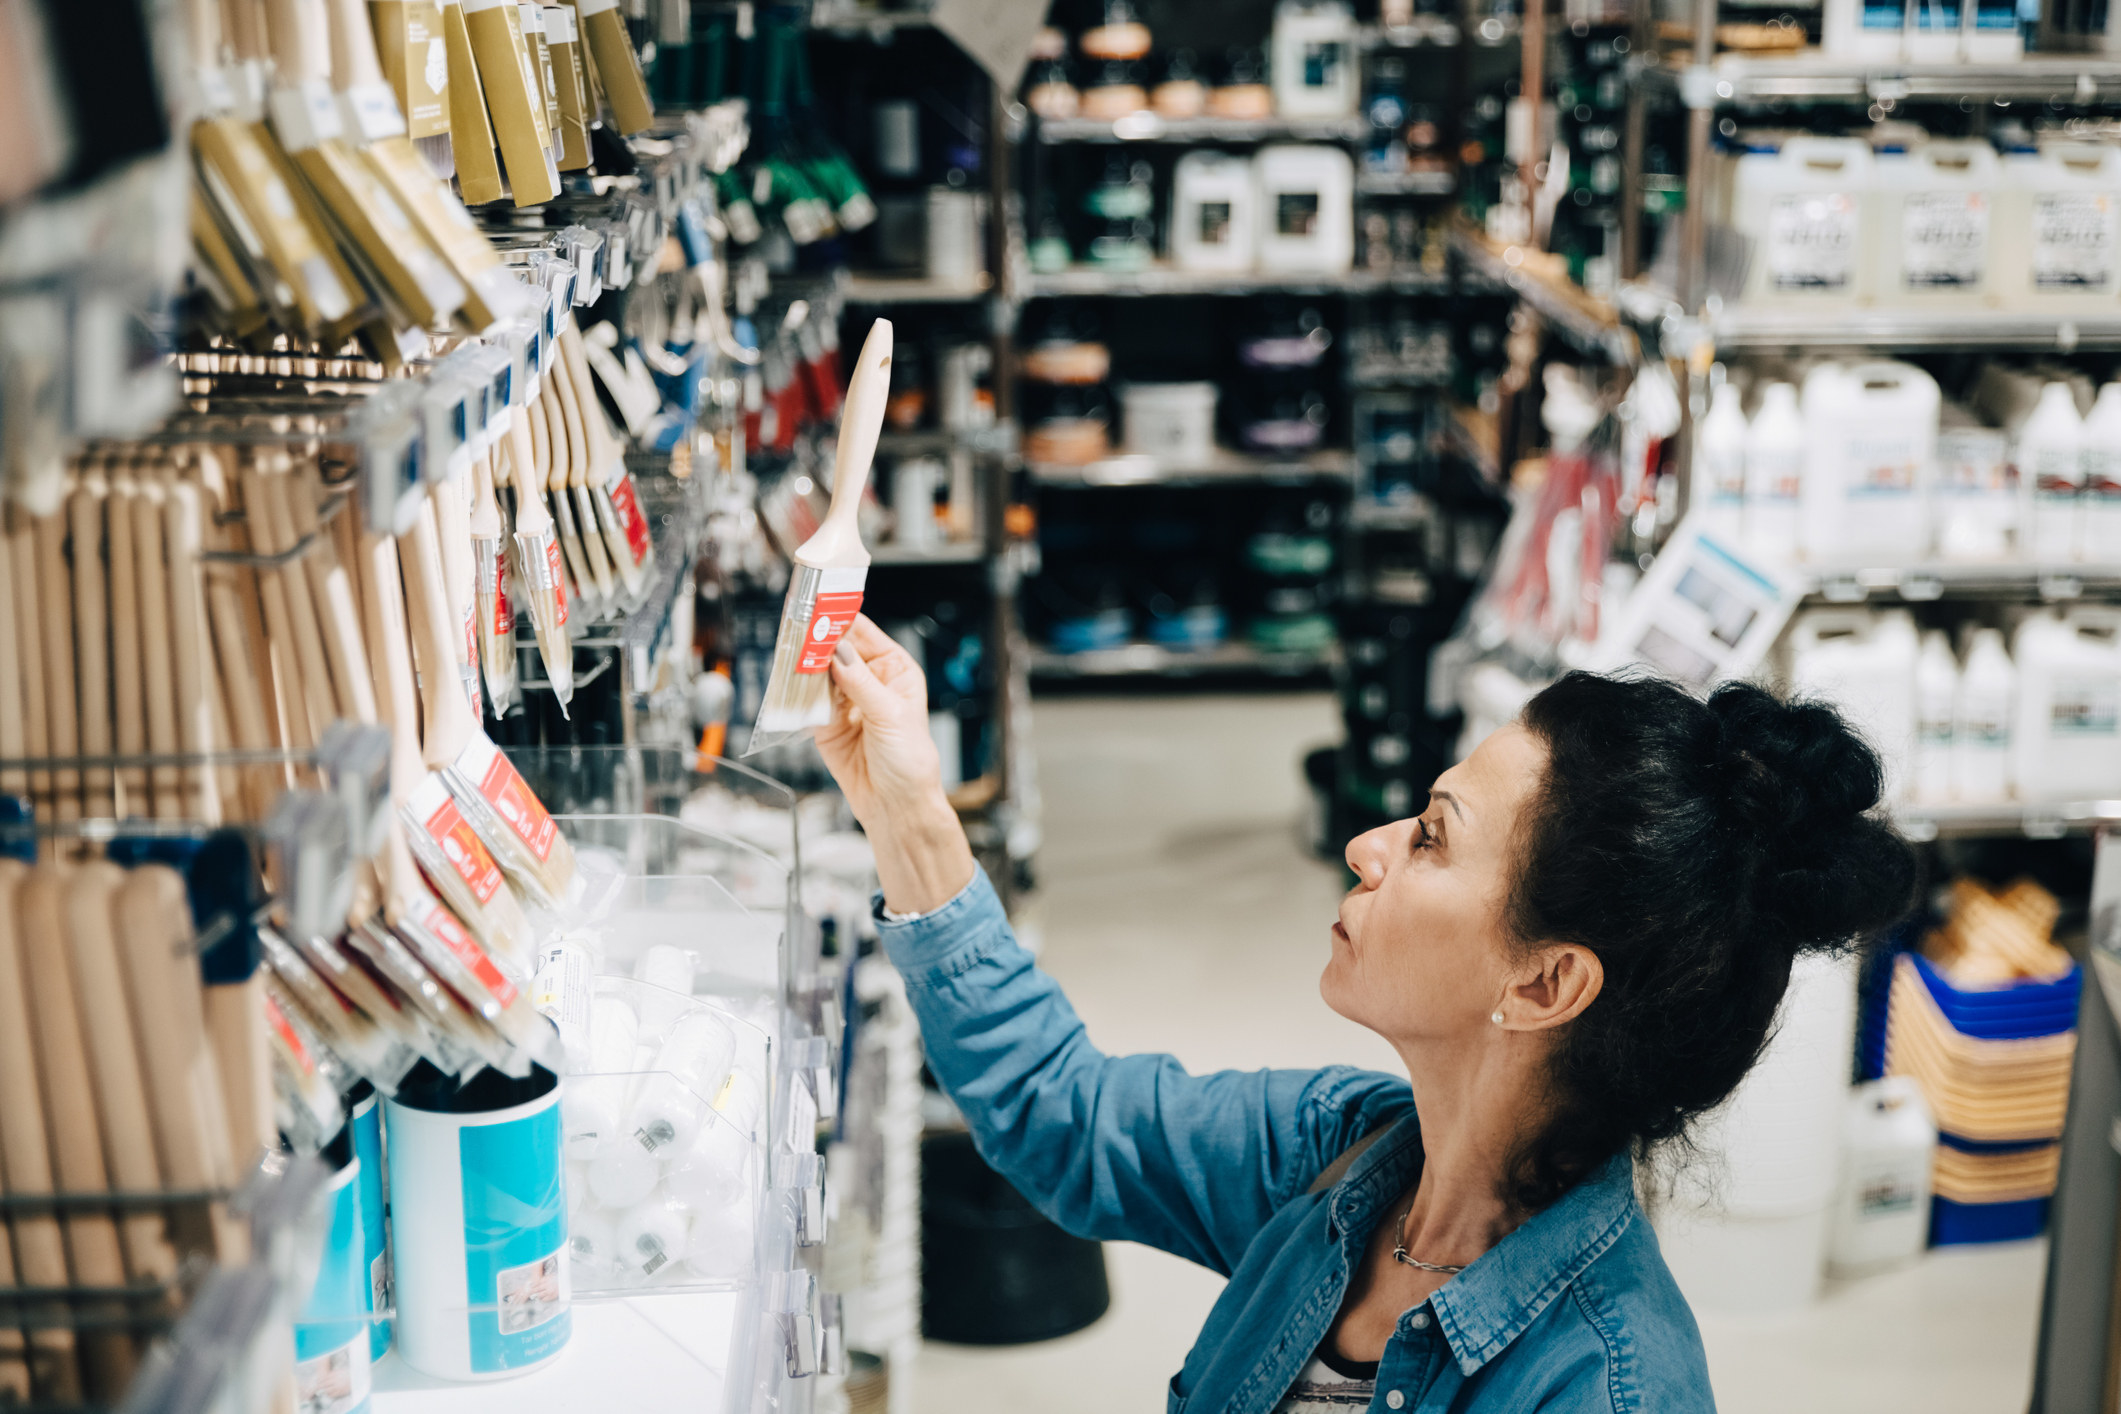 A woman looking at paintbrushes at the hardware store